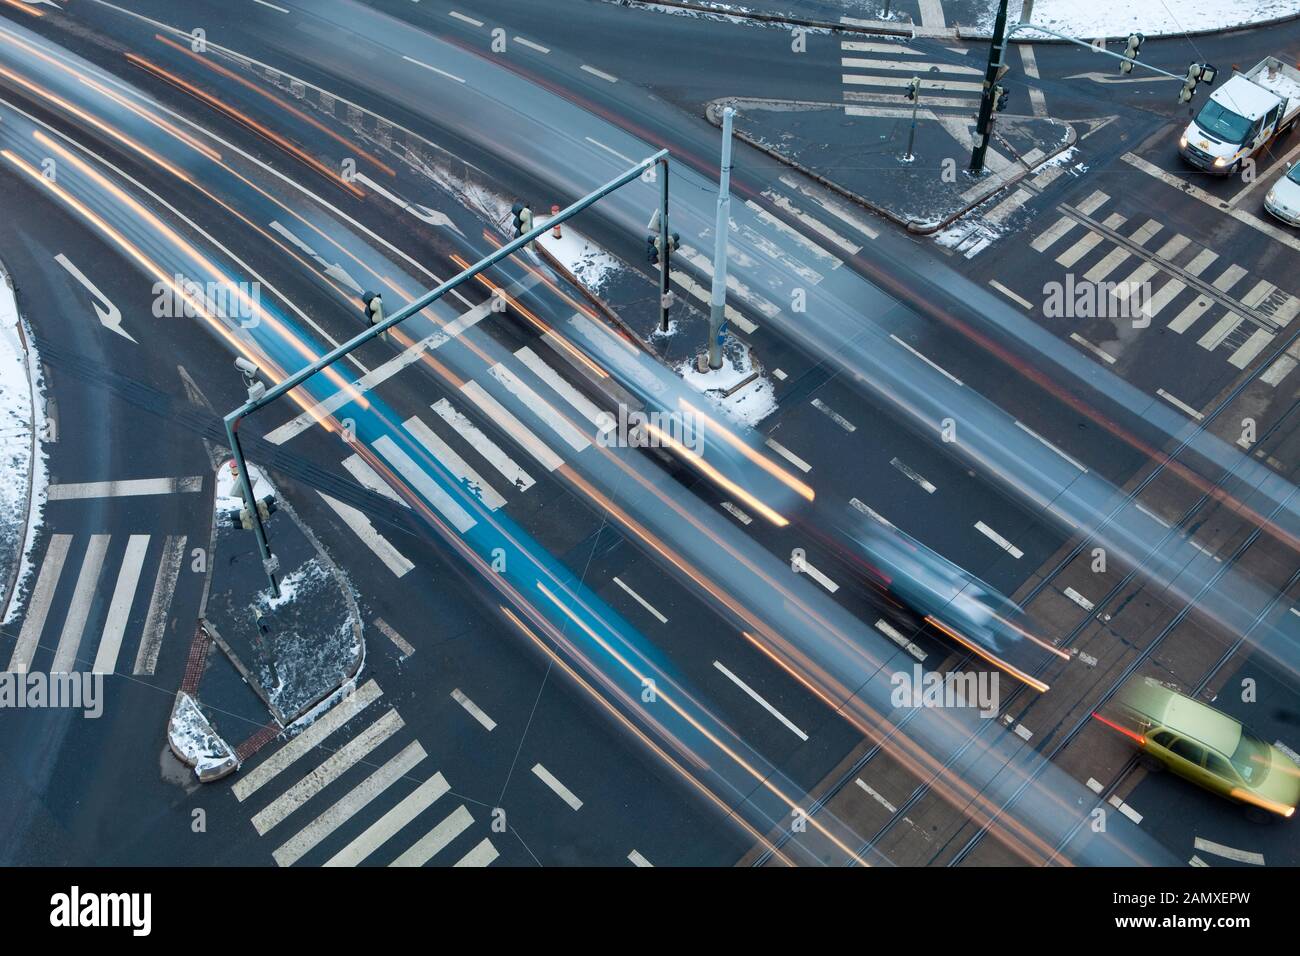 Prague - traffic at crossroads - view from above Stock Photo